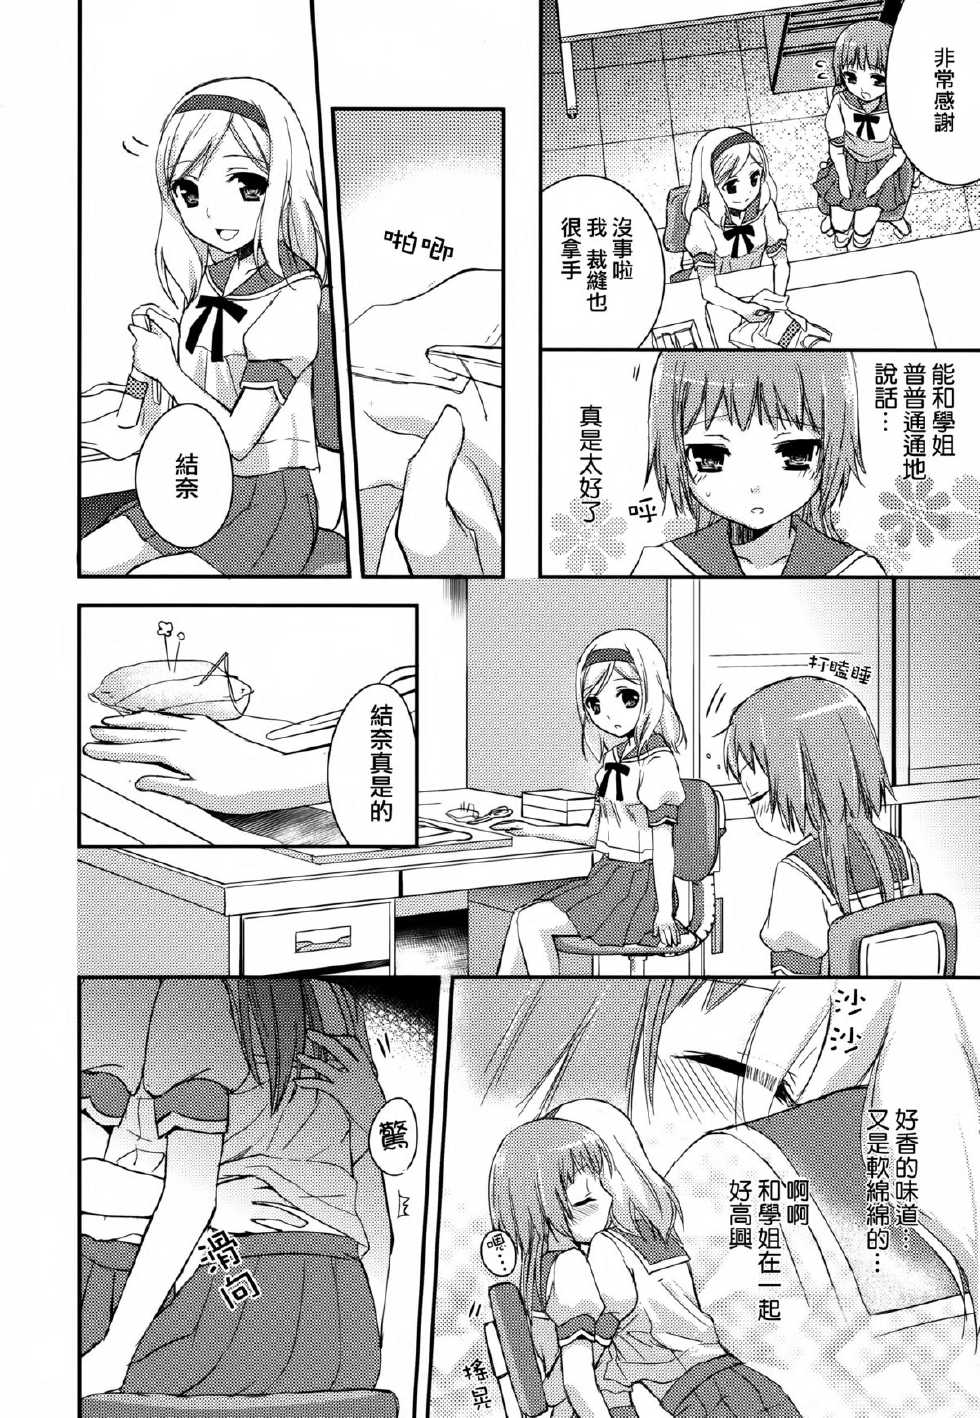 [Anthology] Ao Yuri -Story Of Club Activities- [Chinese] [无毒汉化组] [Incomplete] - Page 27